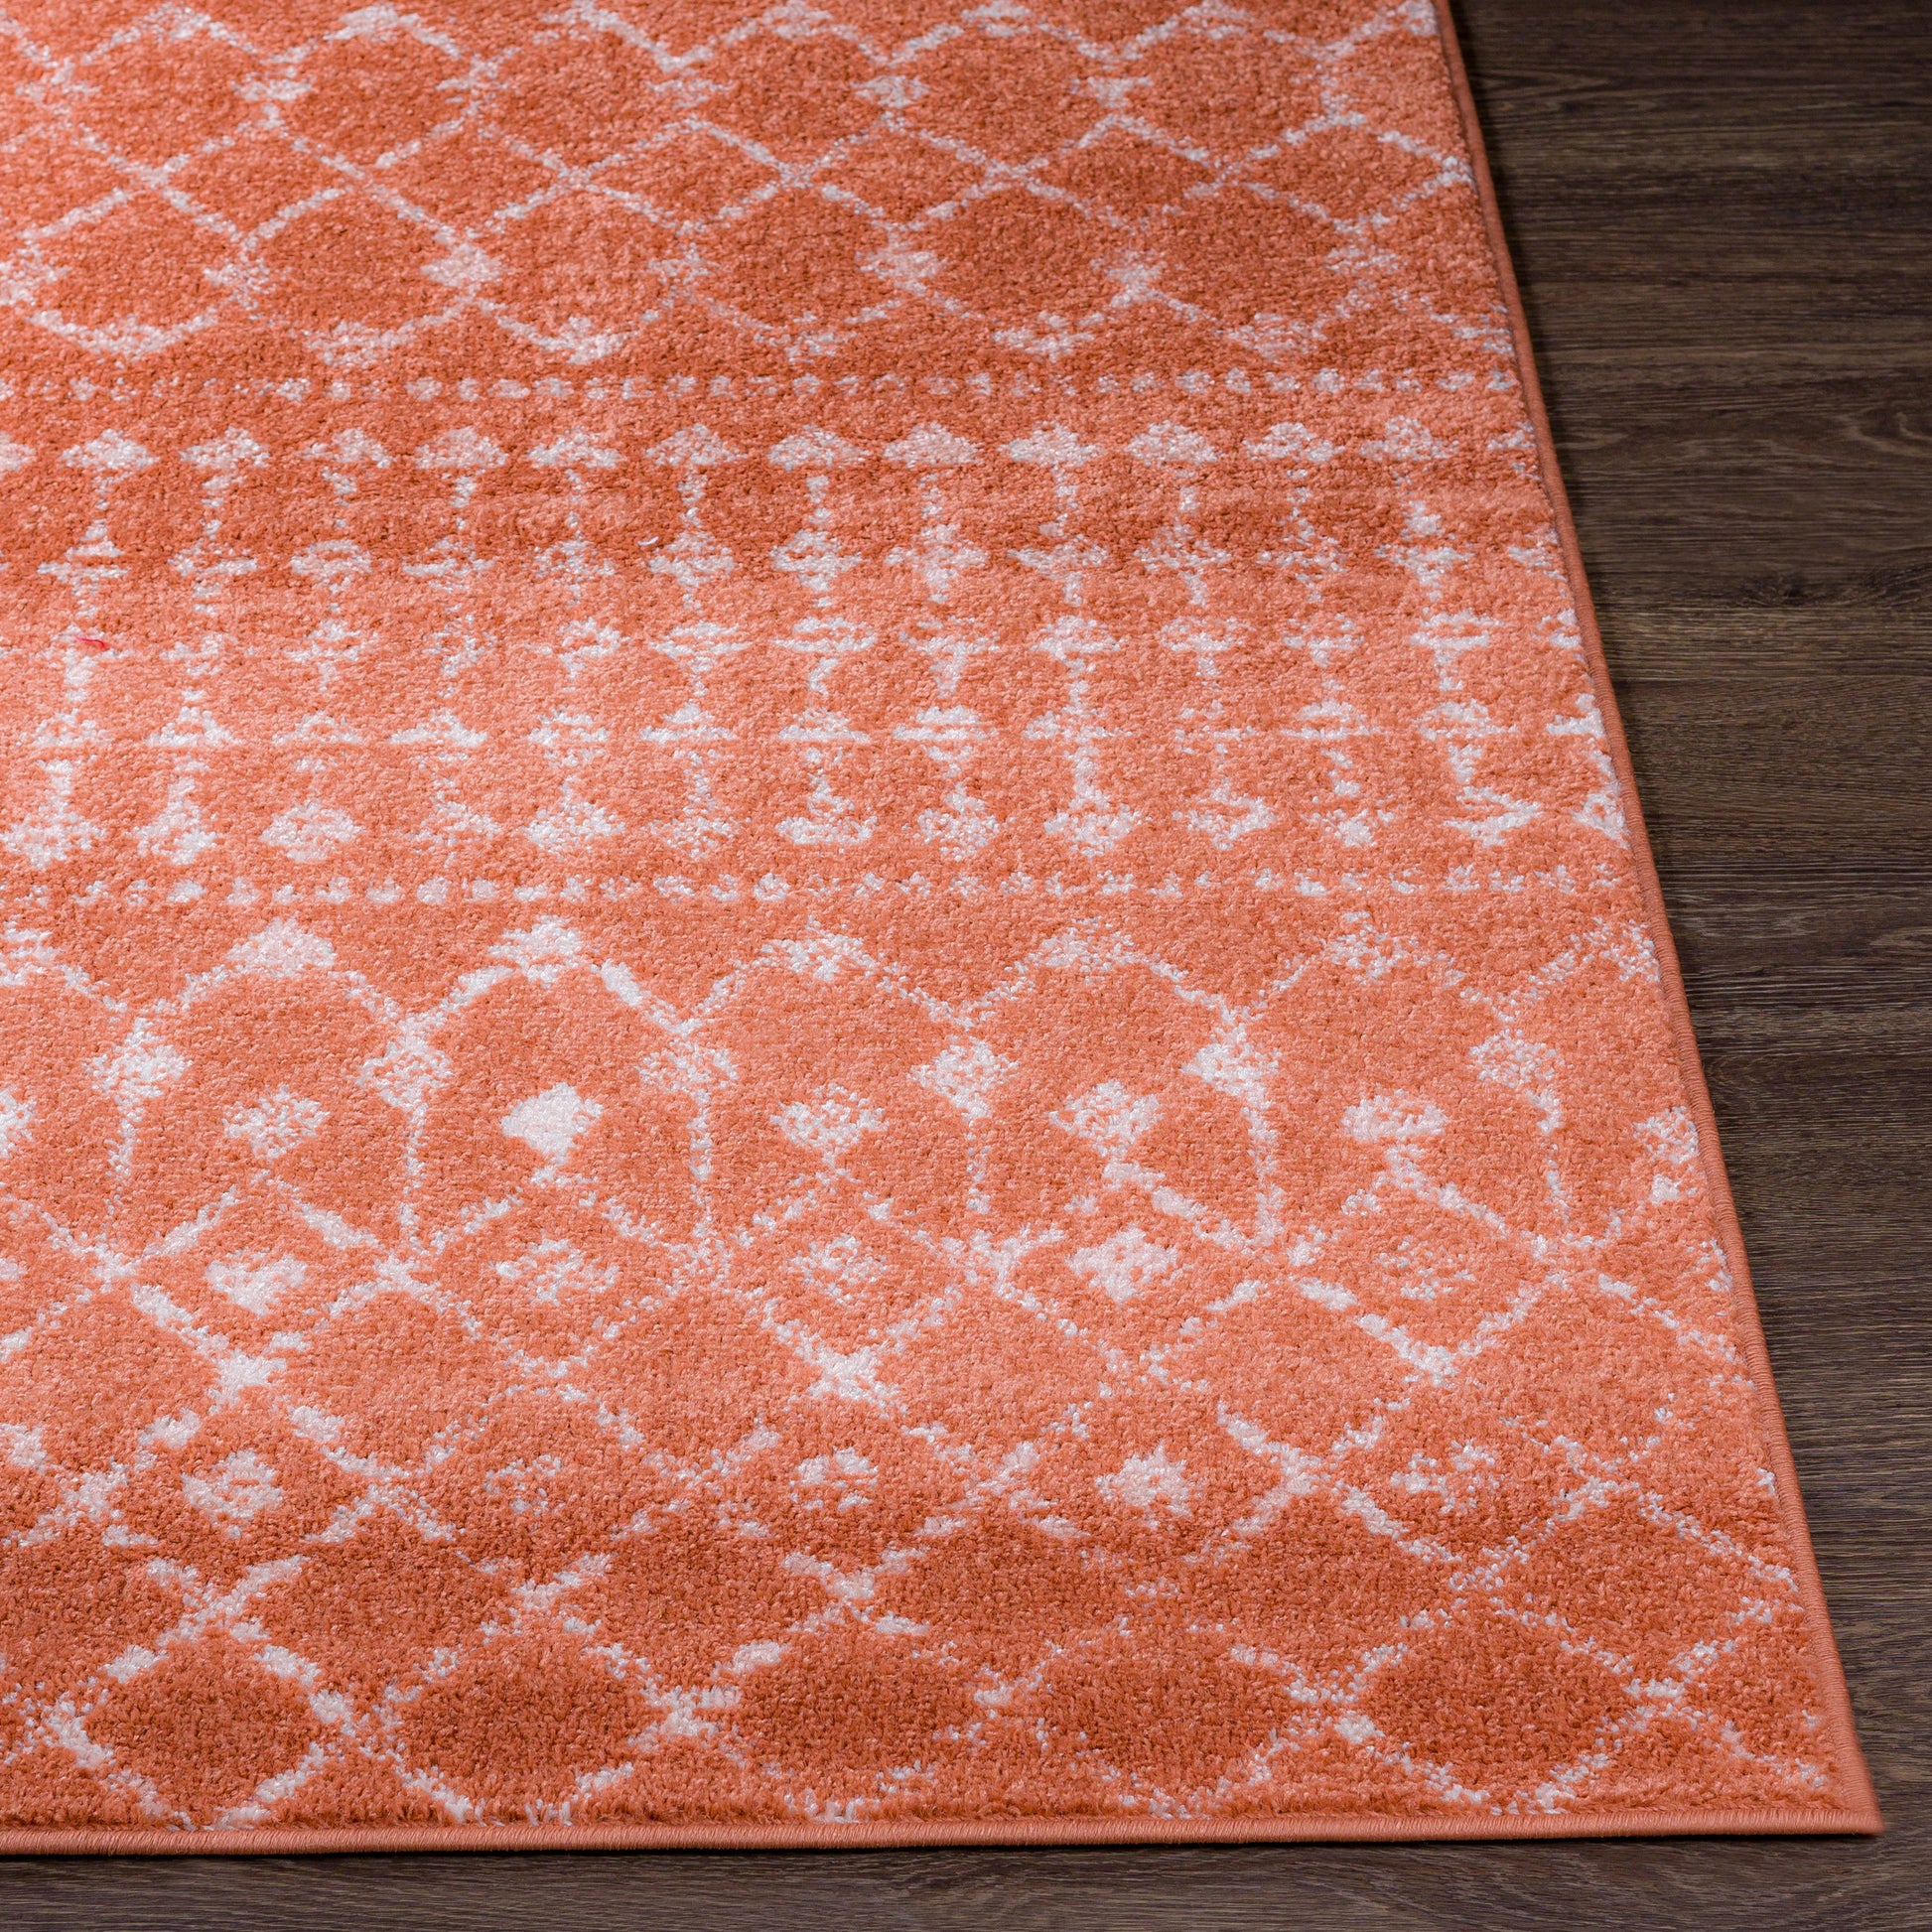 Surya Chester Che-2375 Brick Red, Dusty Coral Area Rug